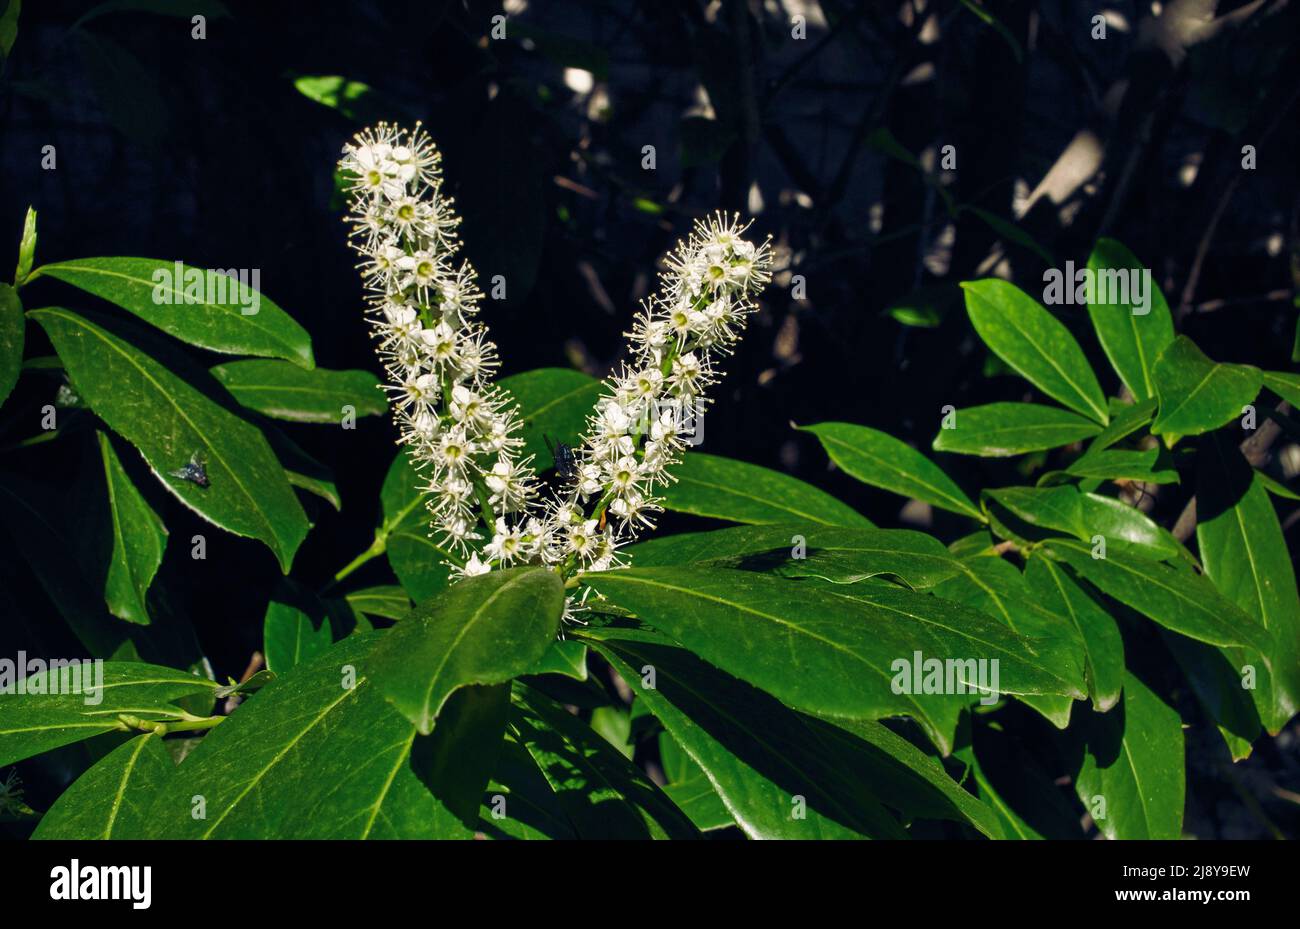 Photo of cherry laurel or prunus laurocerasus flowers with blurry background Stock Photo